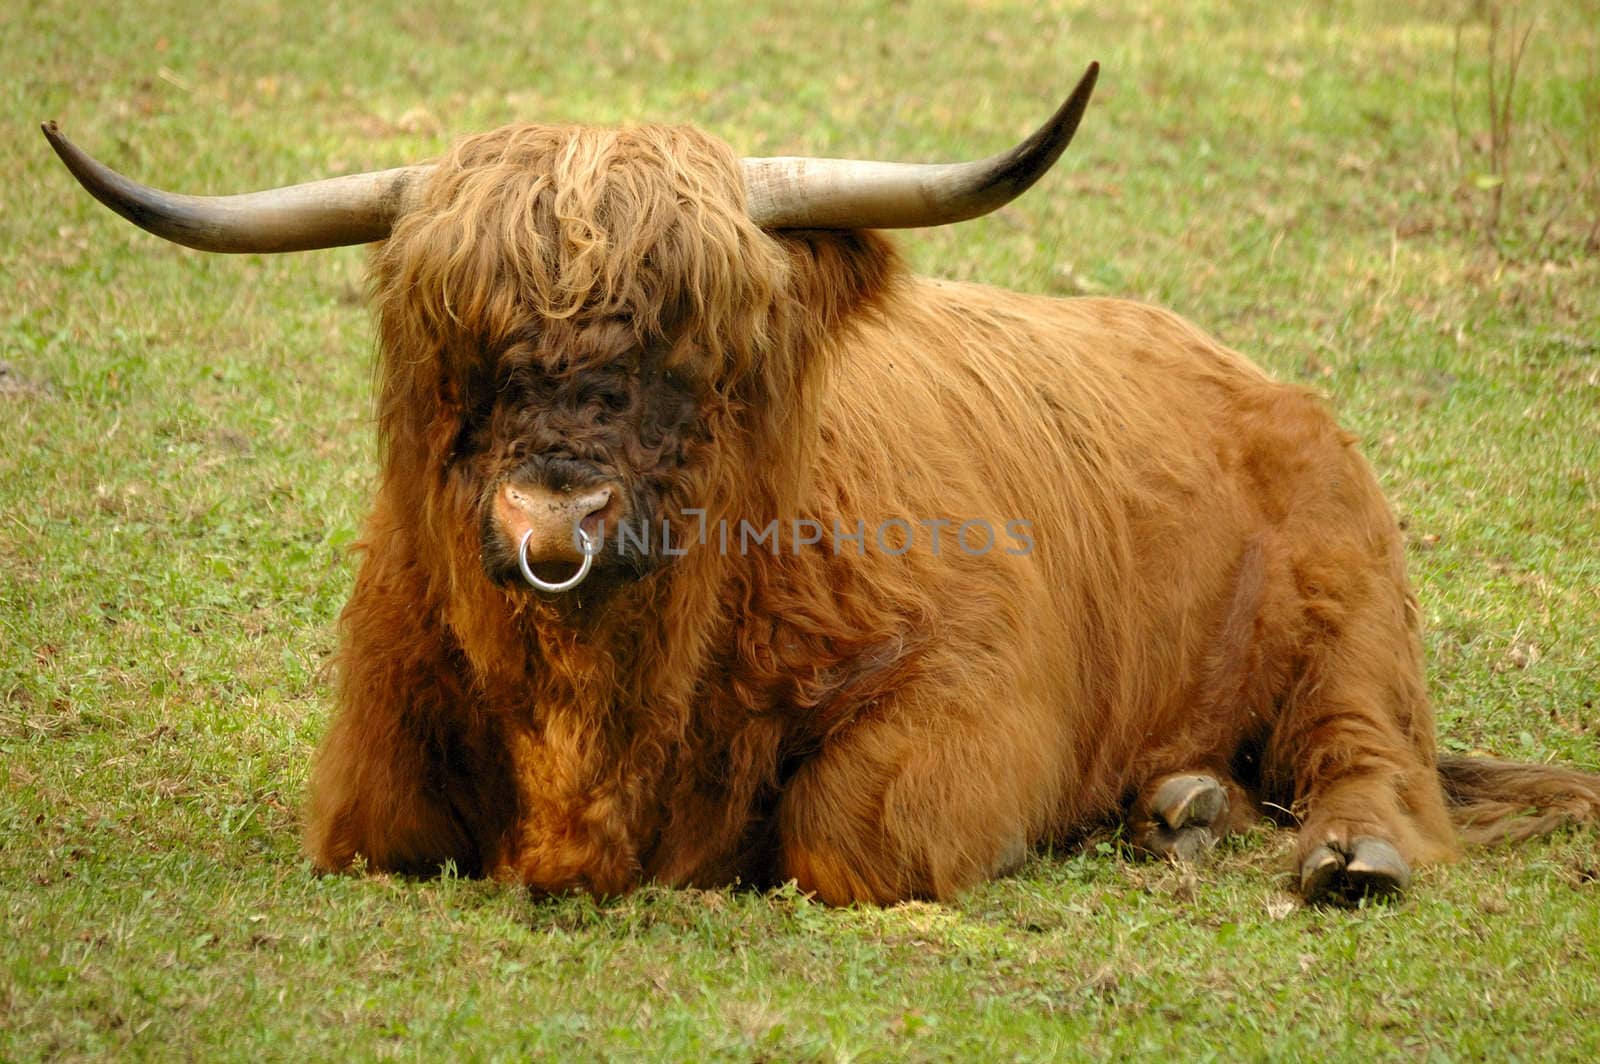 A Scottish Highland bull, resting in his pasture. Known as the 'Hairy coo' in Scotland.